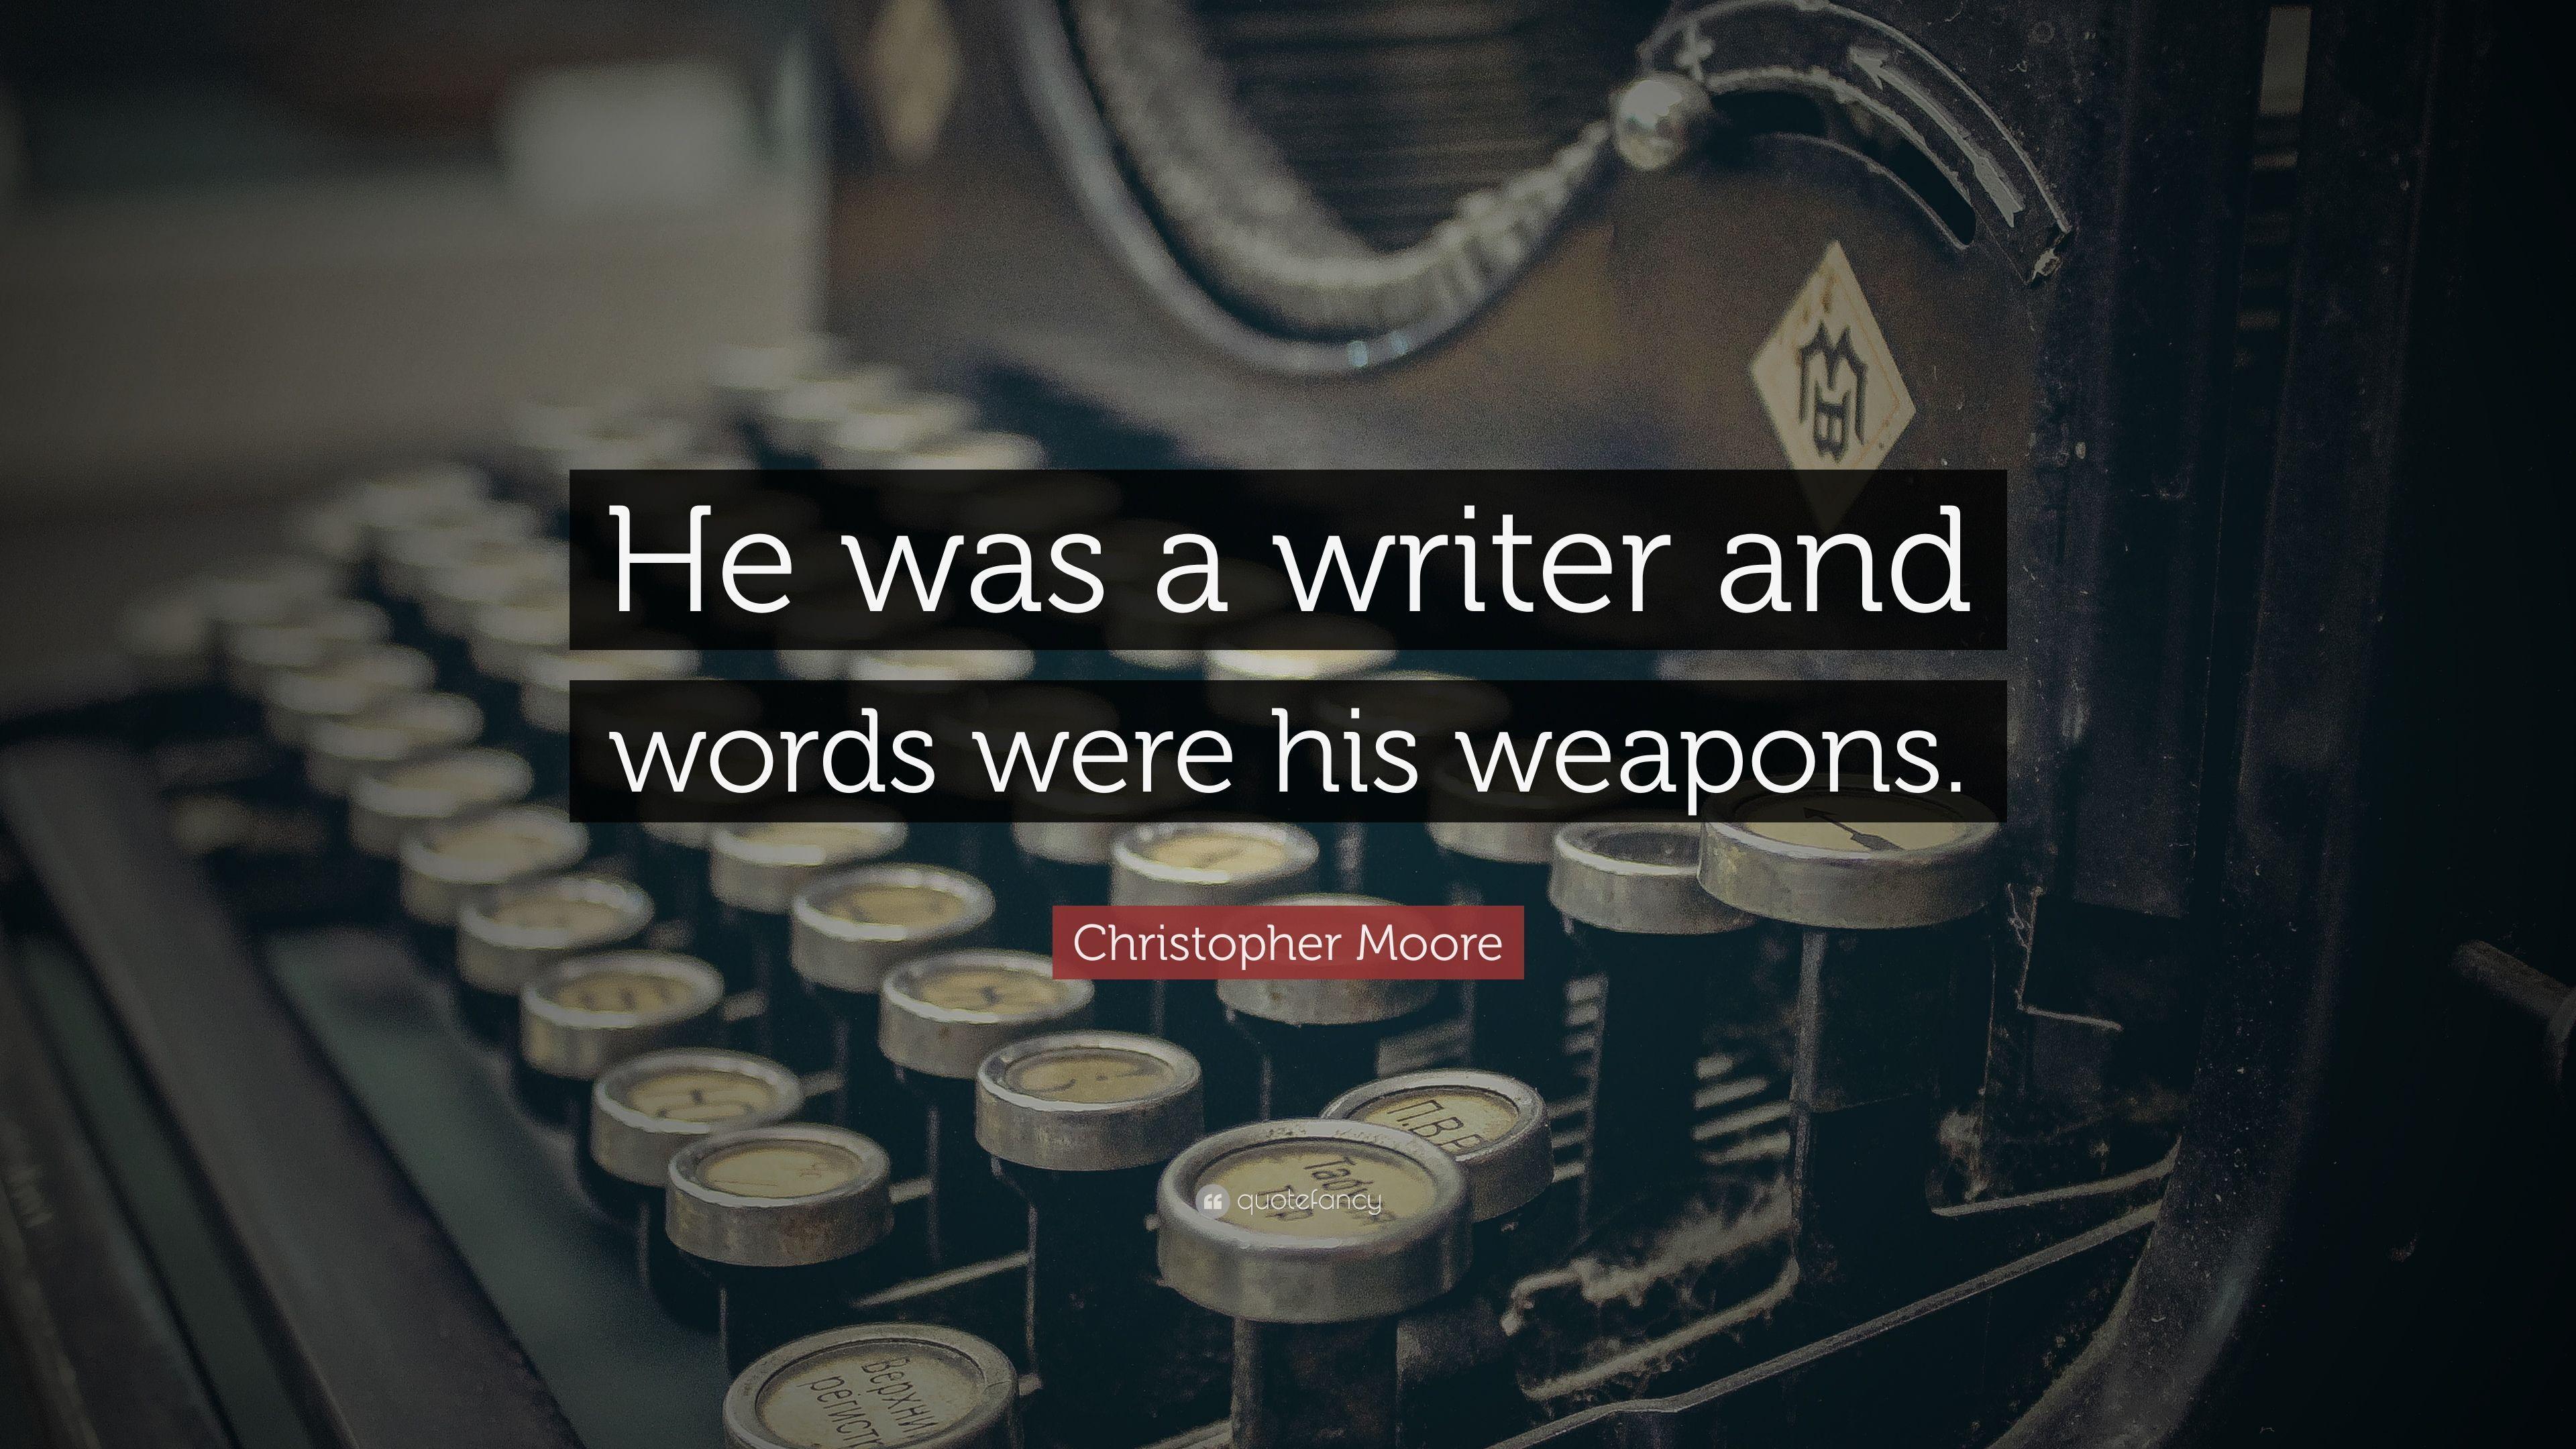 Christopher Moore Quote: “He was a writer and words were his